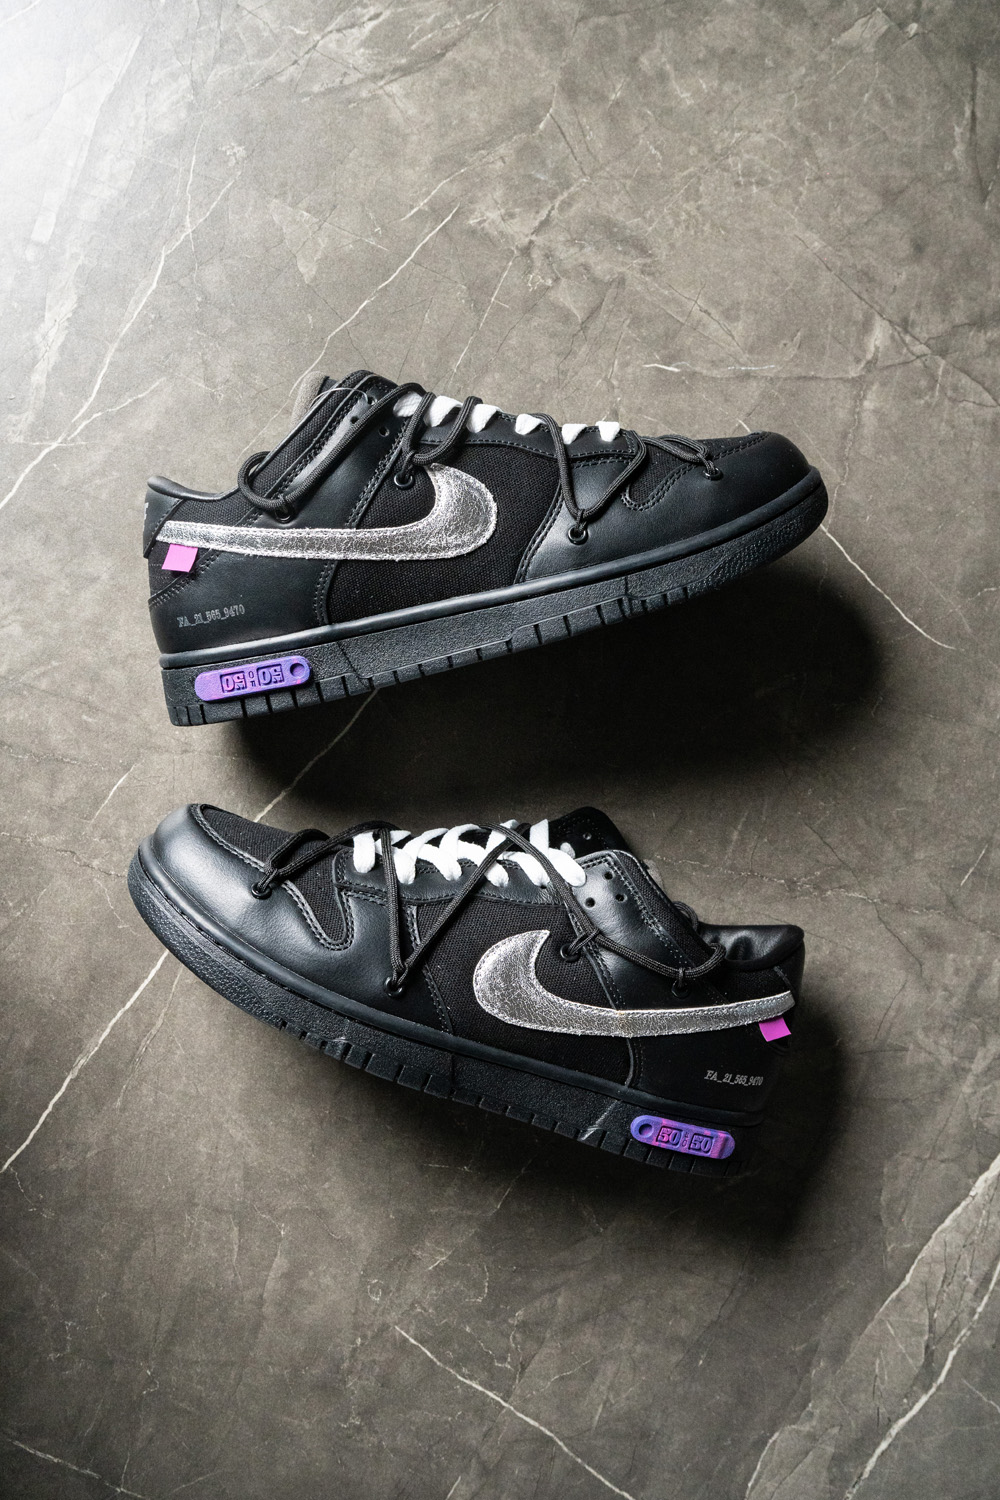 Off-White x Dunk Low 'Lot 50 of 50'